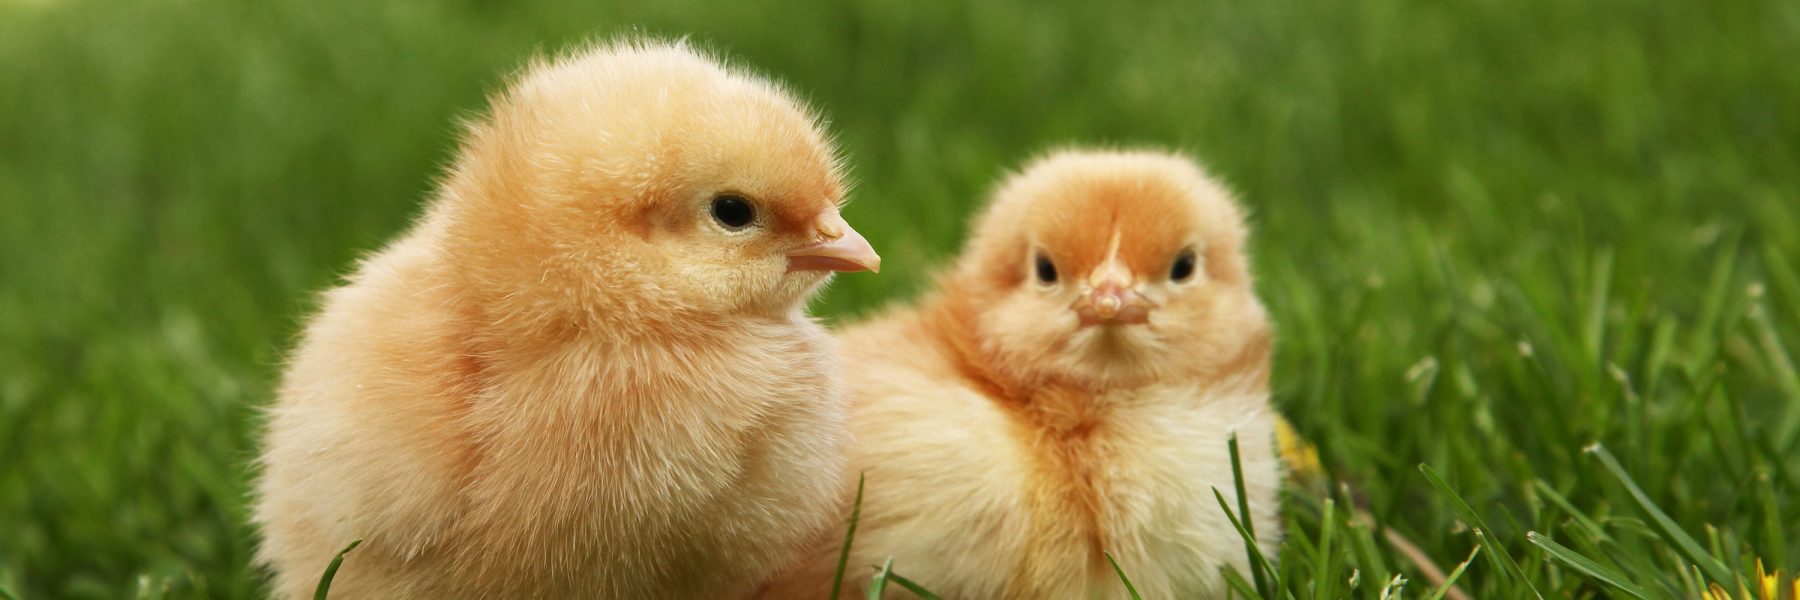 France Bans Controversial Practice of Live-Shredding Chicks